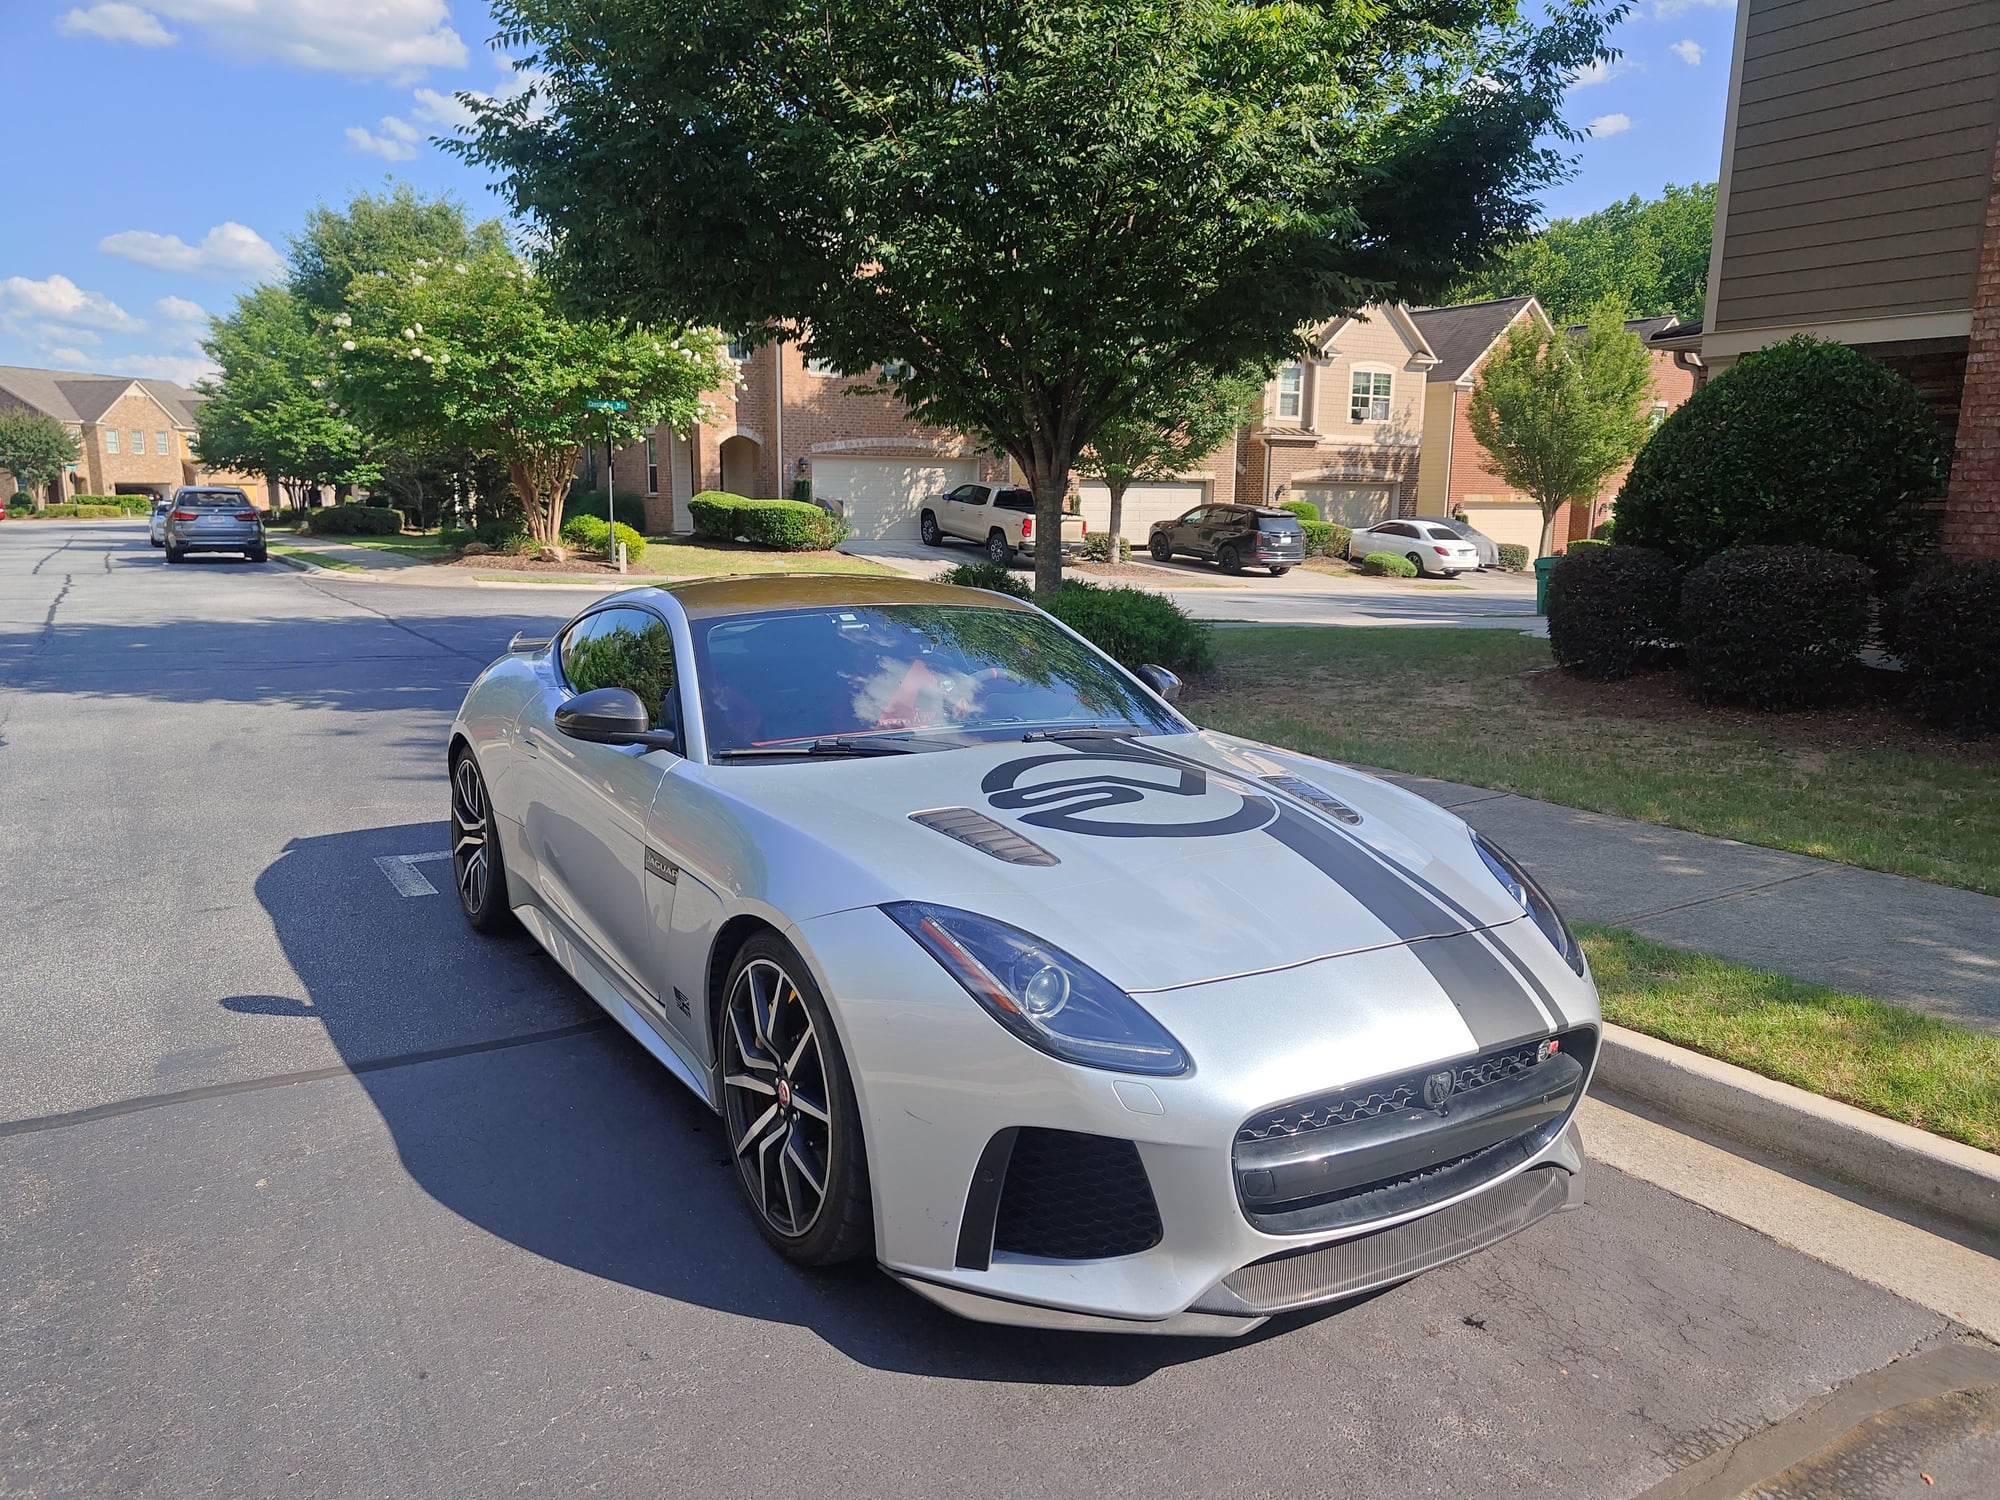 2017 Jaguar F-Type - FS: 2017 F-type SVR Rhodium Silver/ Red - Used - VIN SAJWJ6J82HMK39053 - 52,000 Miles - 8 cyl - AWD - Automatic - Coupe - Silver - Chamblee, GA 30341, United States